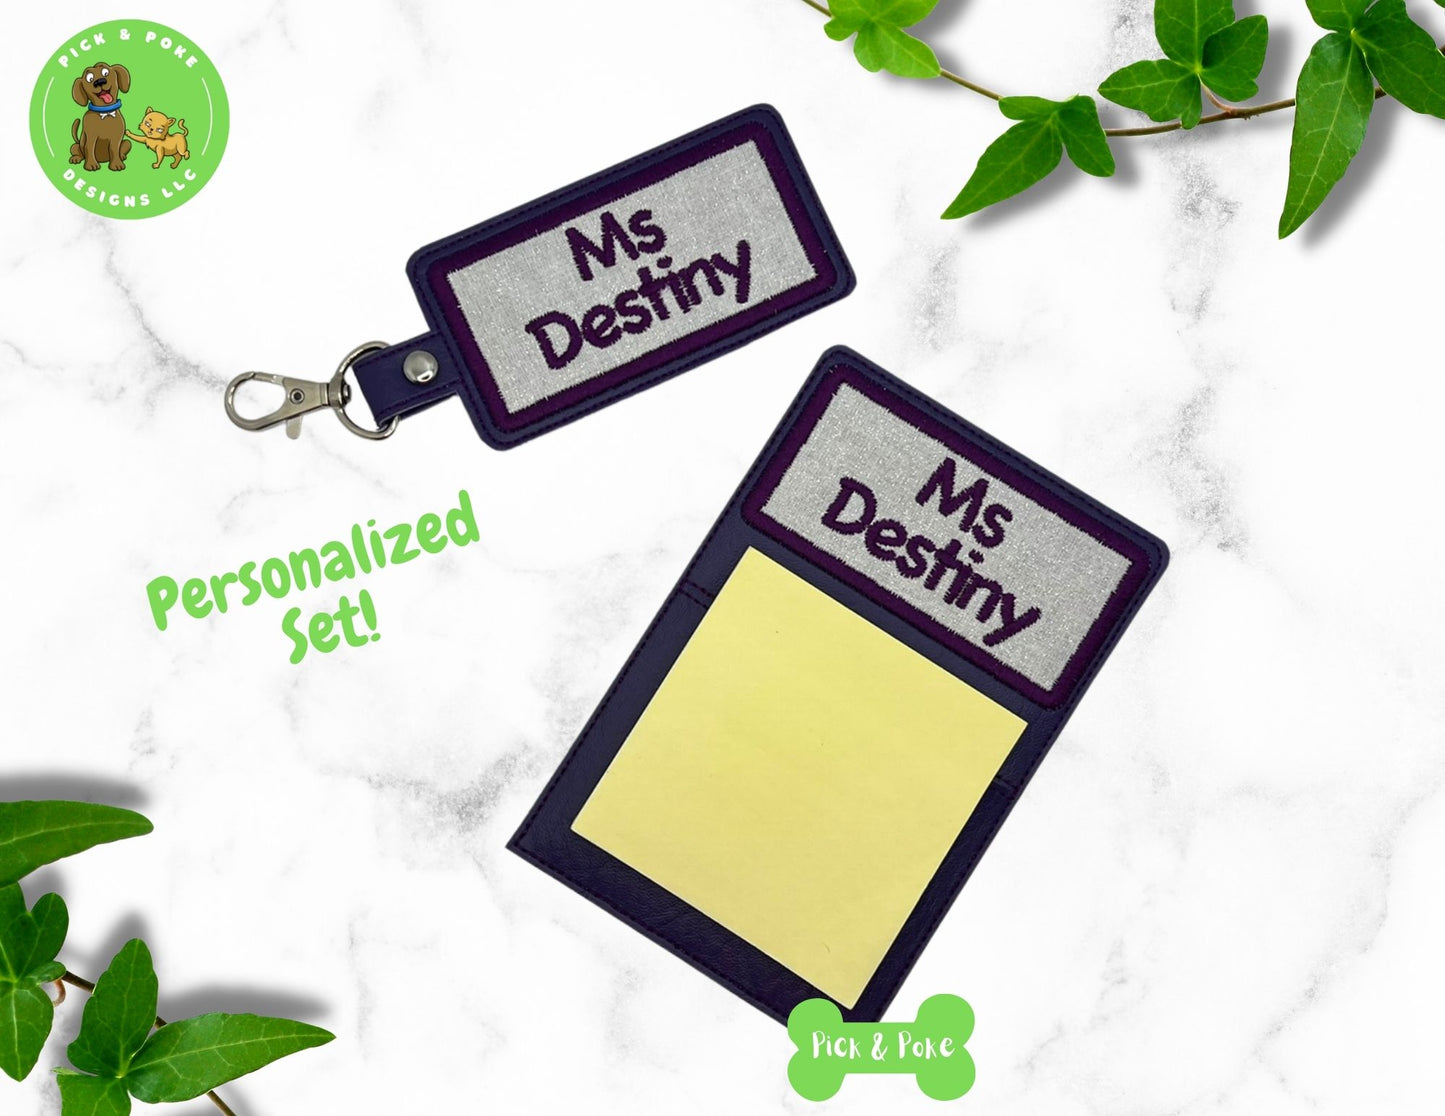 Personalized Sticky Note Pad Holder and Matching Key Chain Set (includes sticky notes)